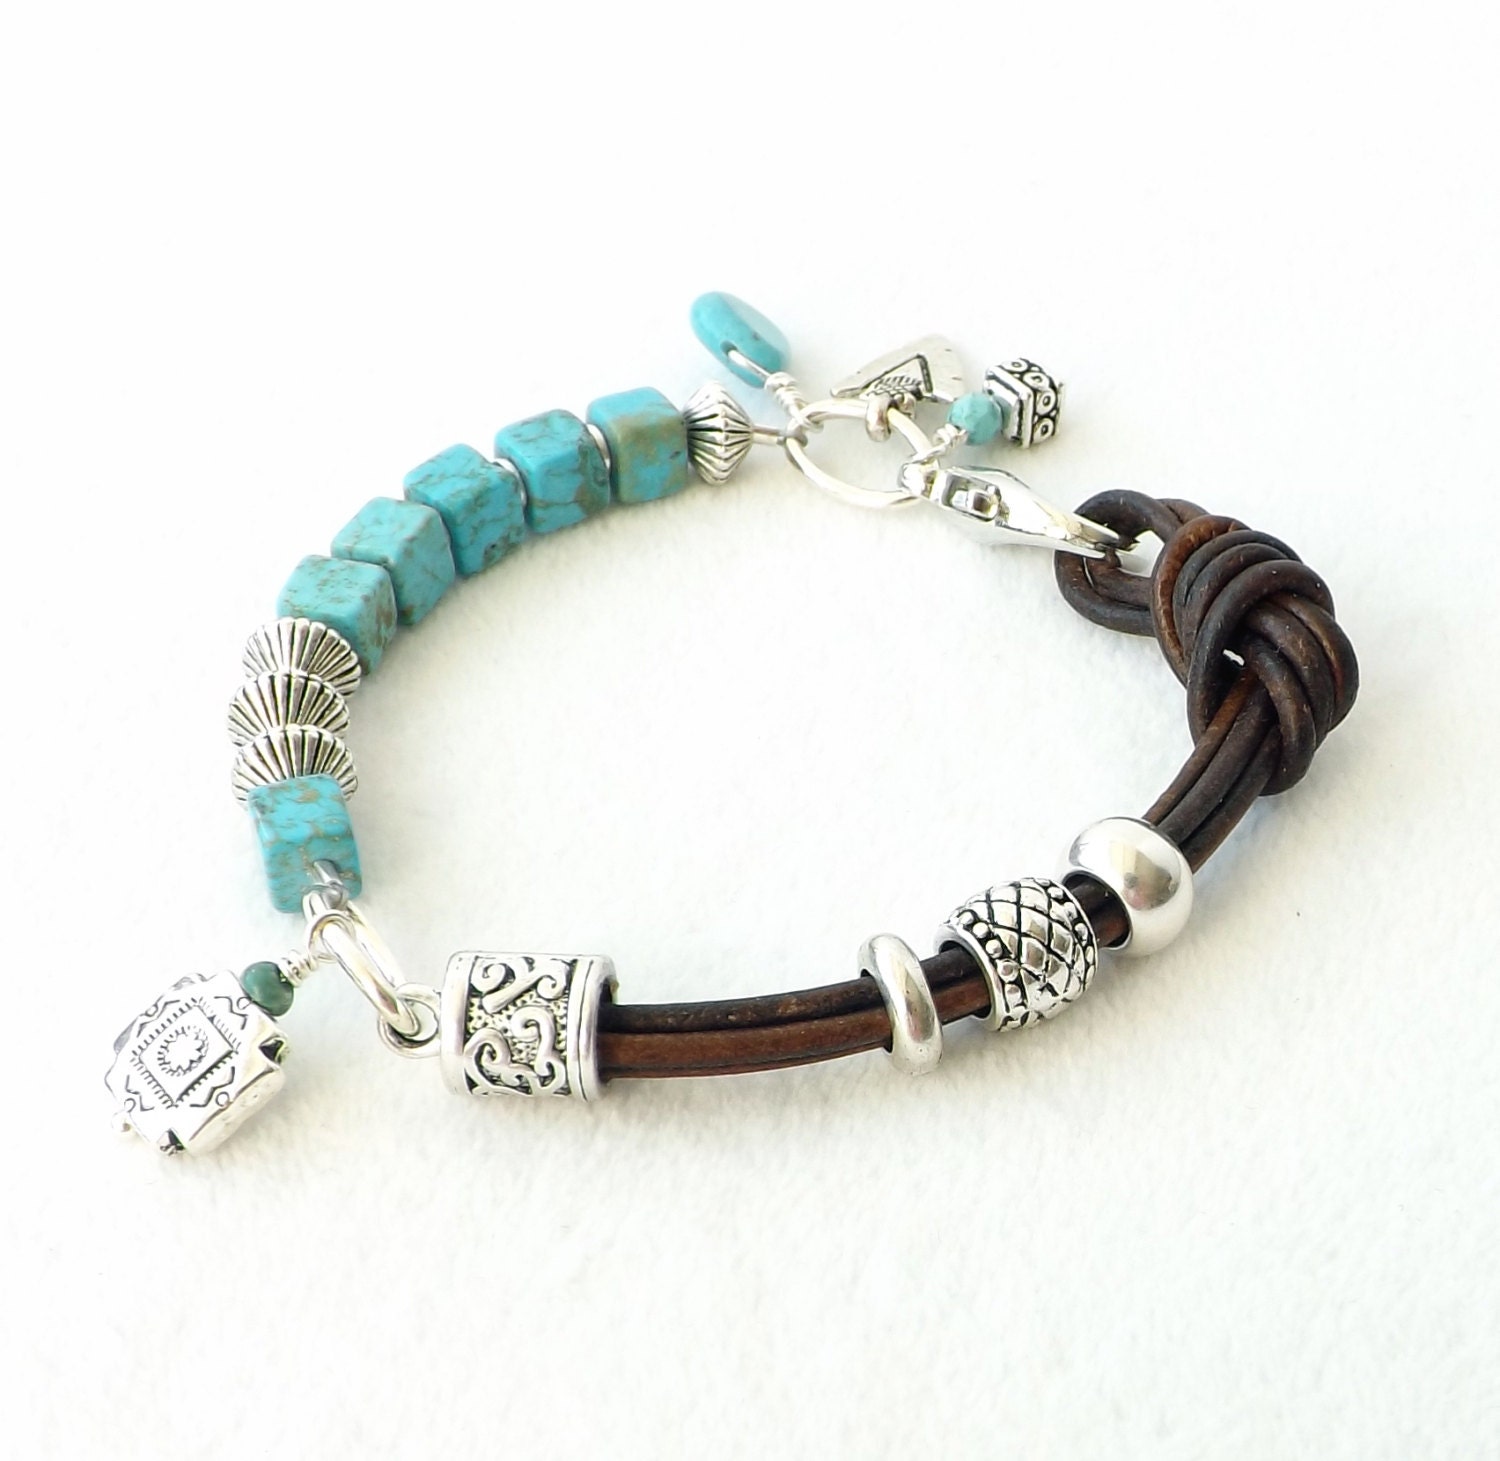 Turquoise Bracelet Brown Leather Bracelet by connectionsbymaya